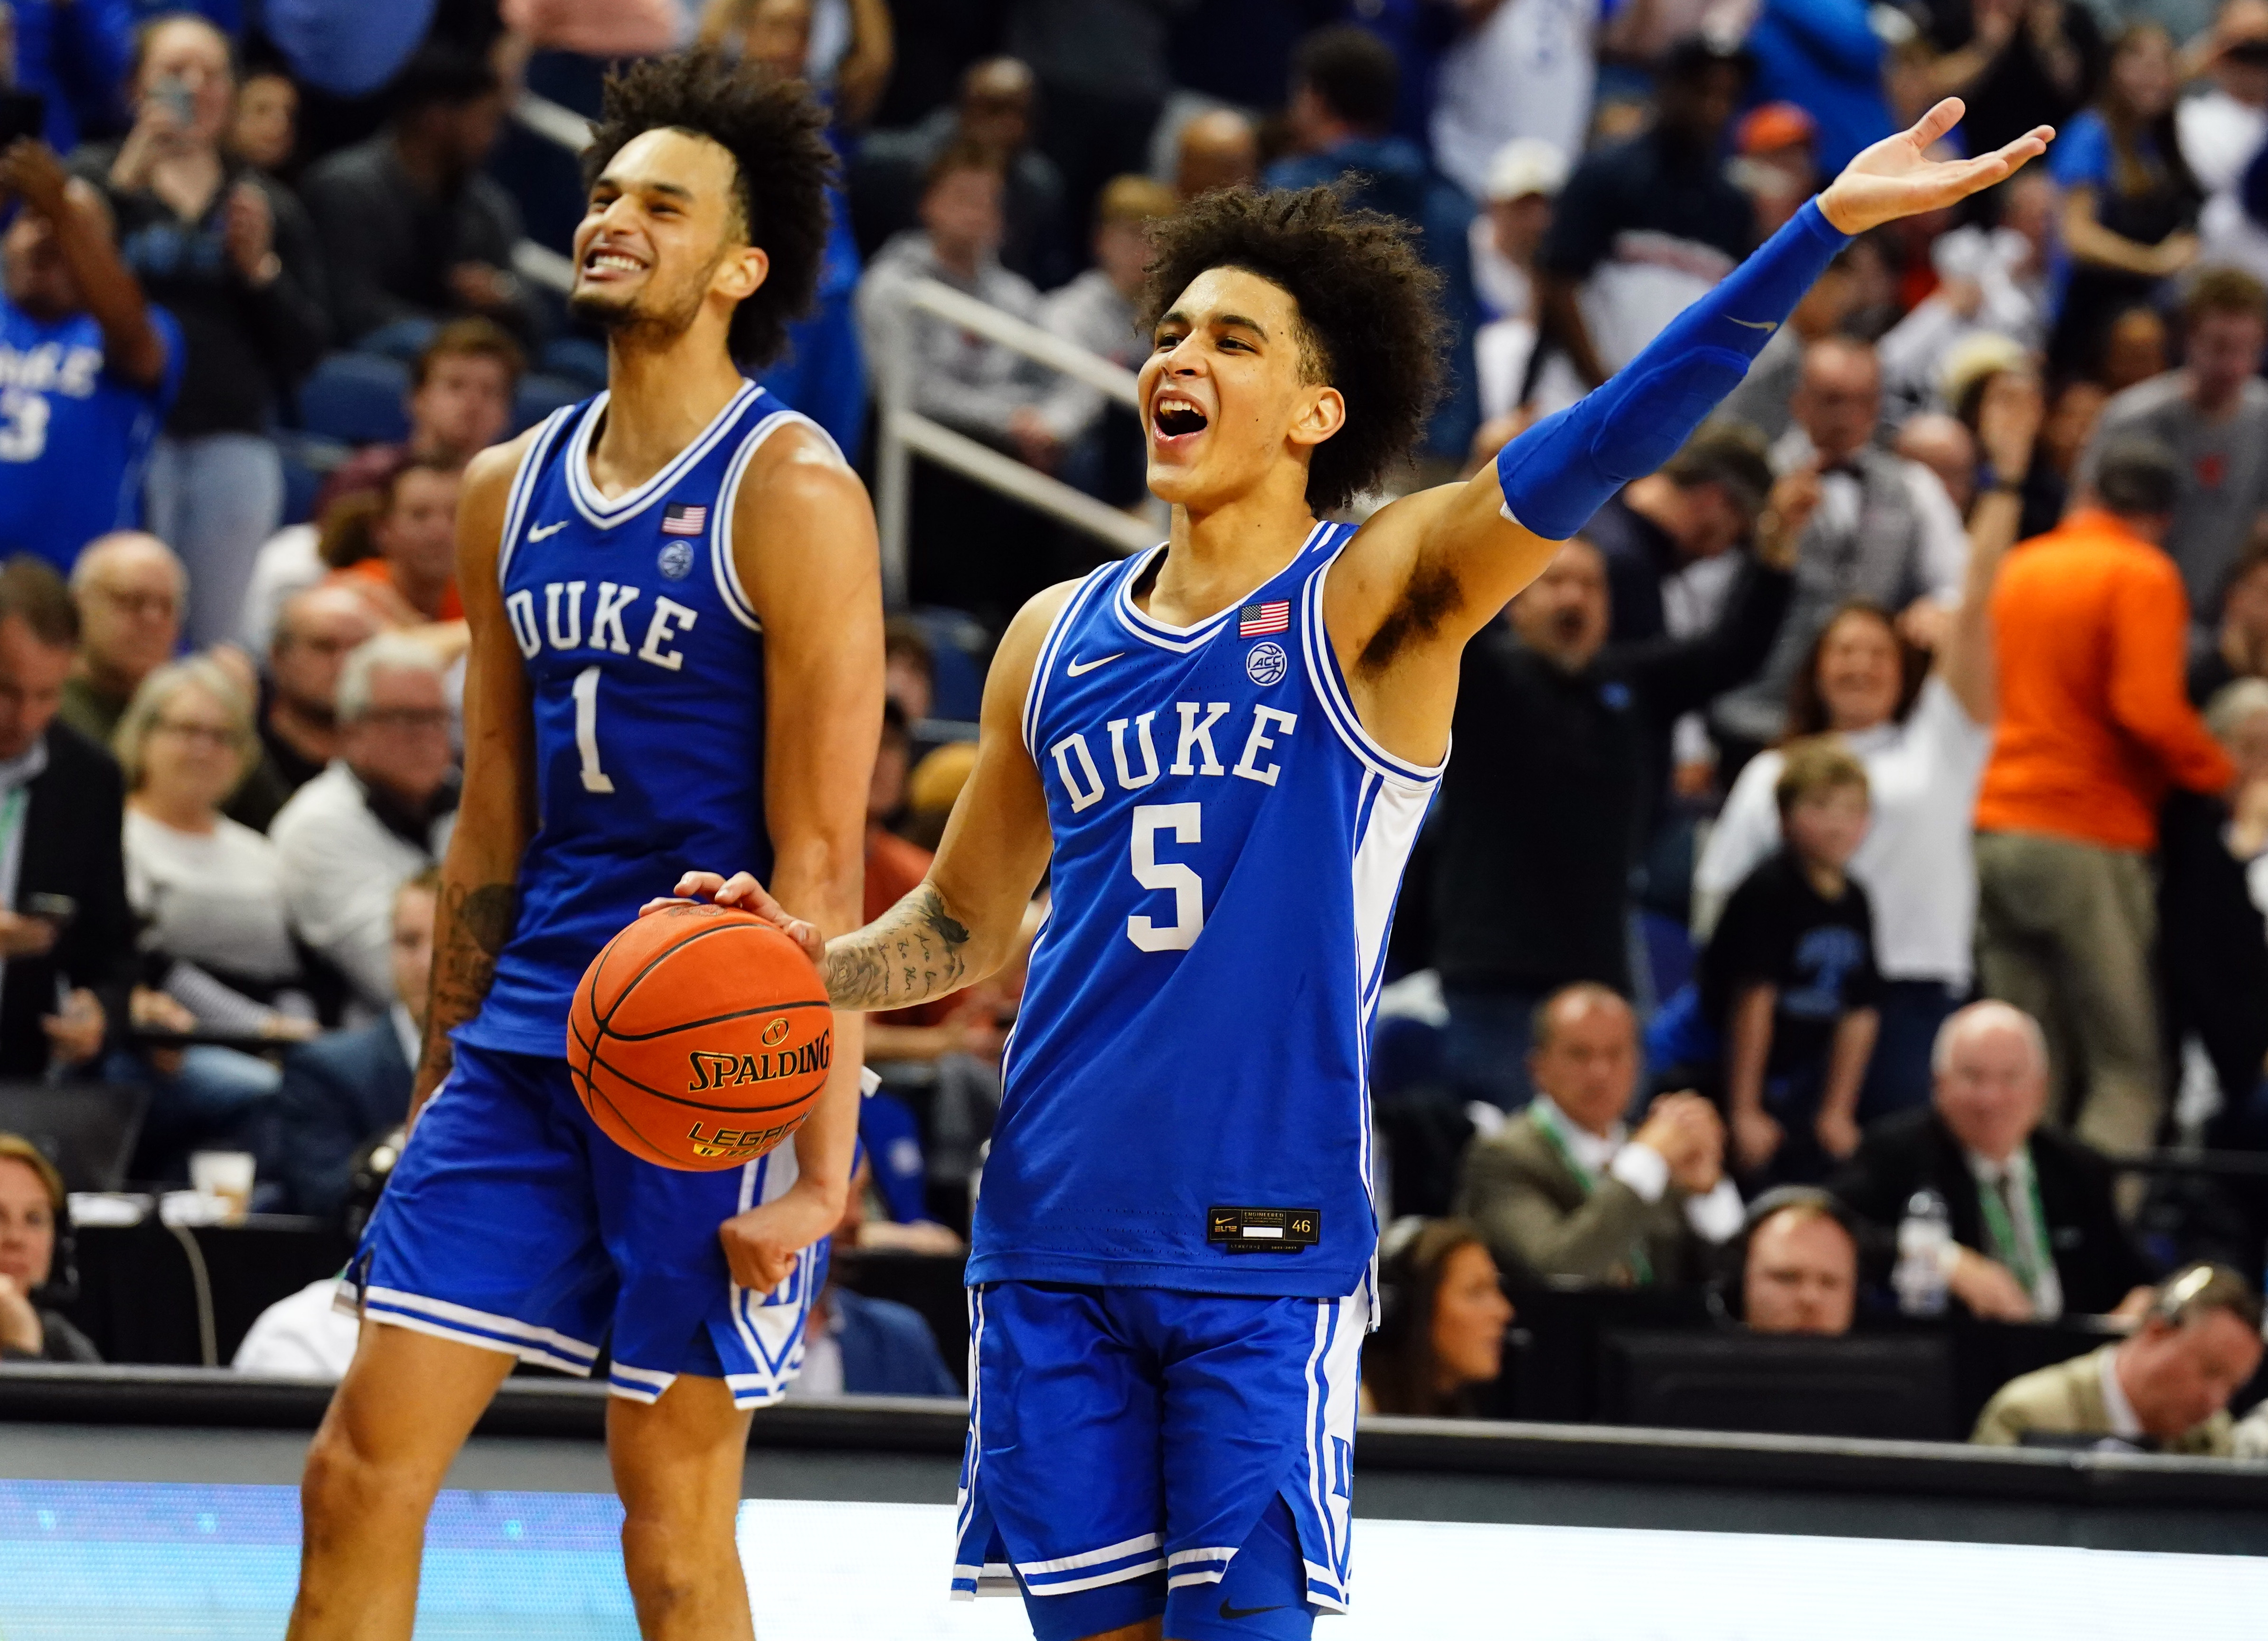 2023 Sweet 16 Bets | Picks for the Sweet 16